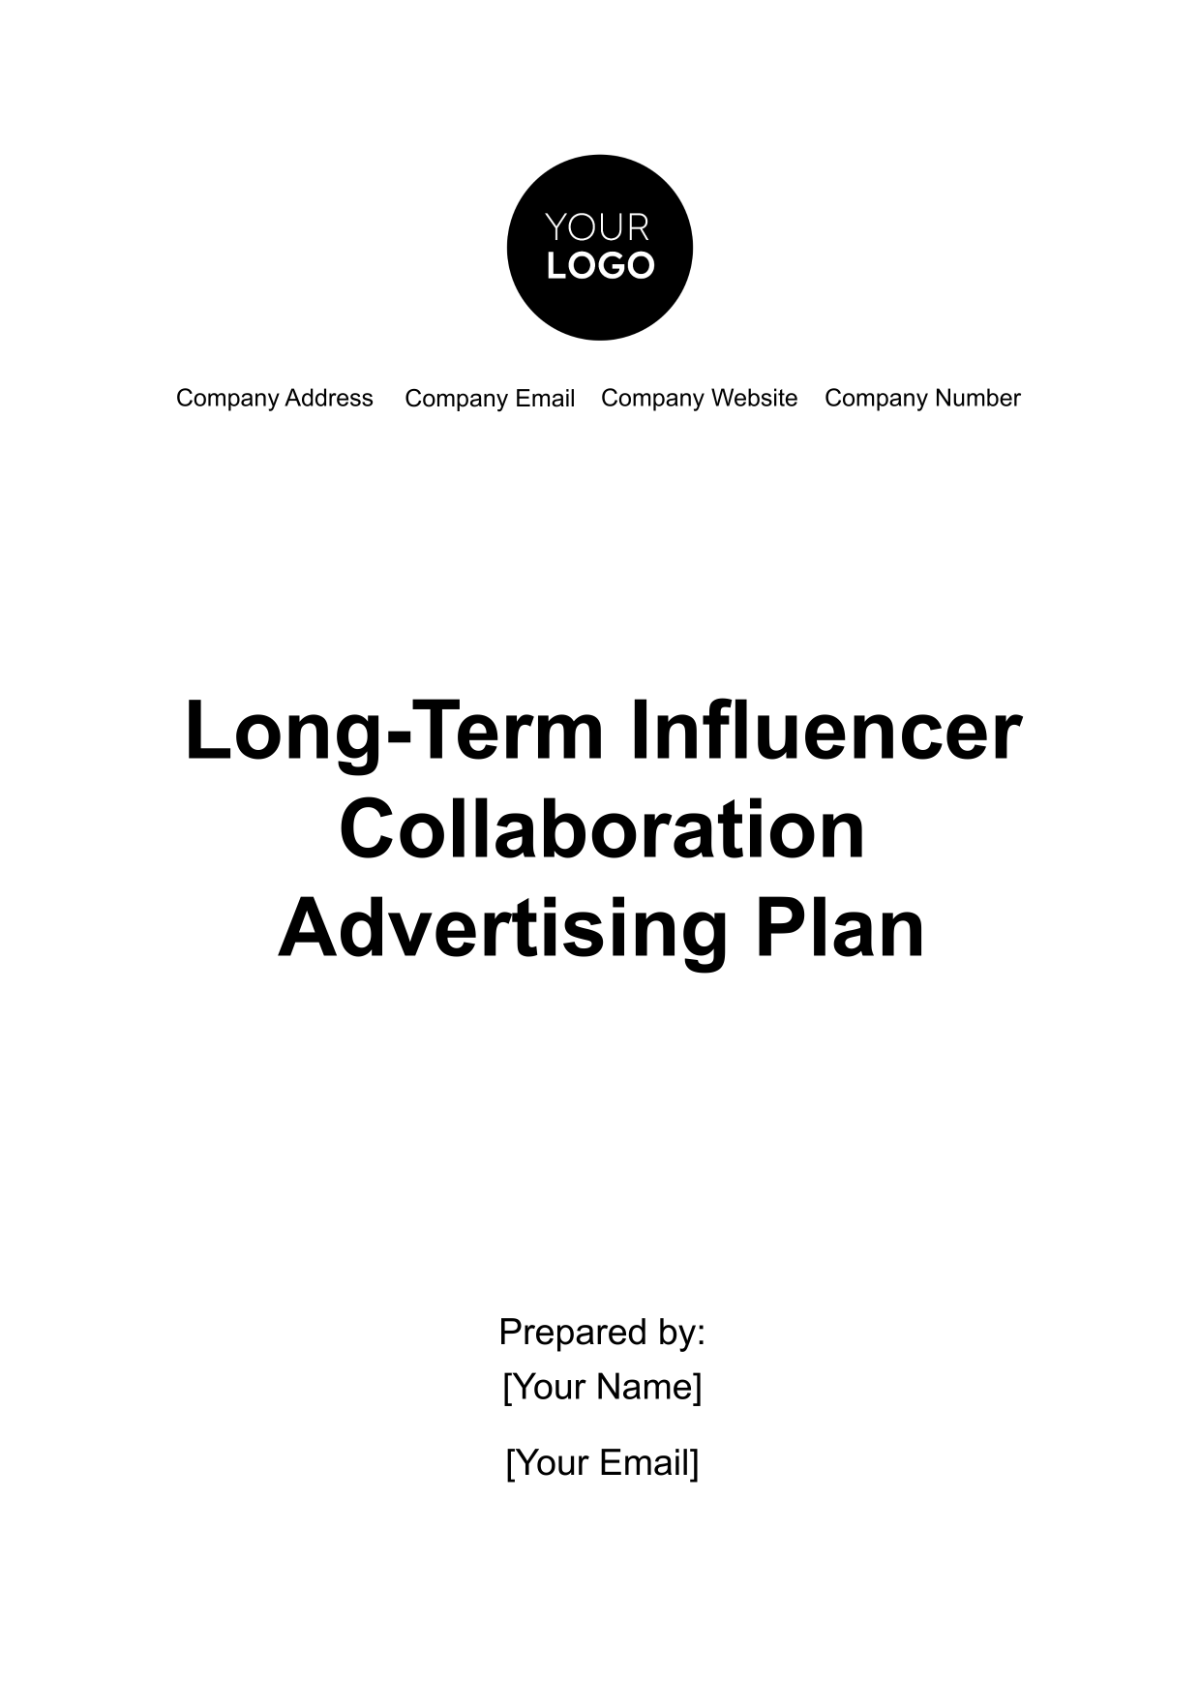 Long-Term Influencer Collaboration Advertising Plan Template